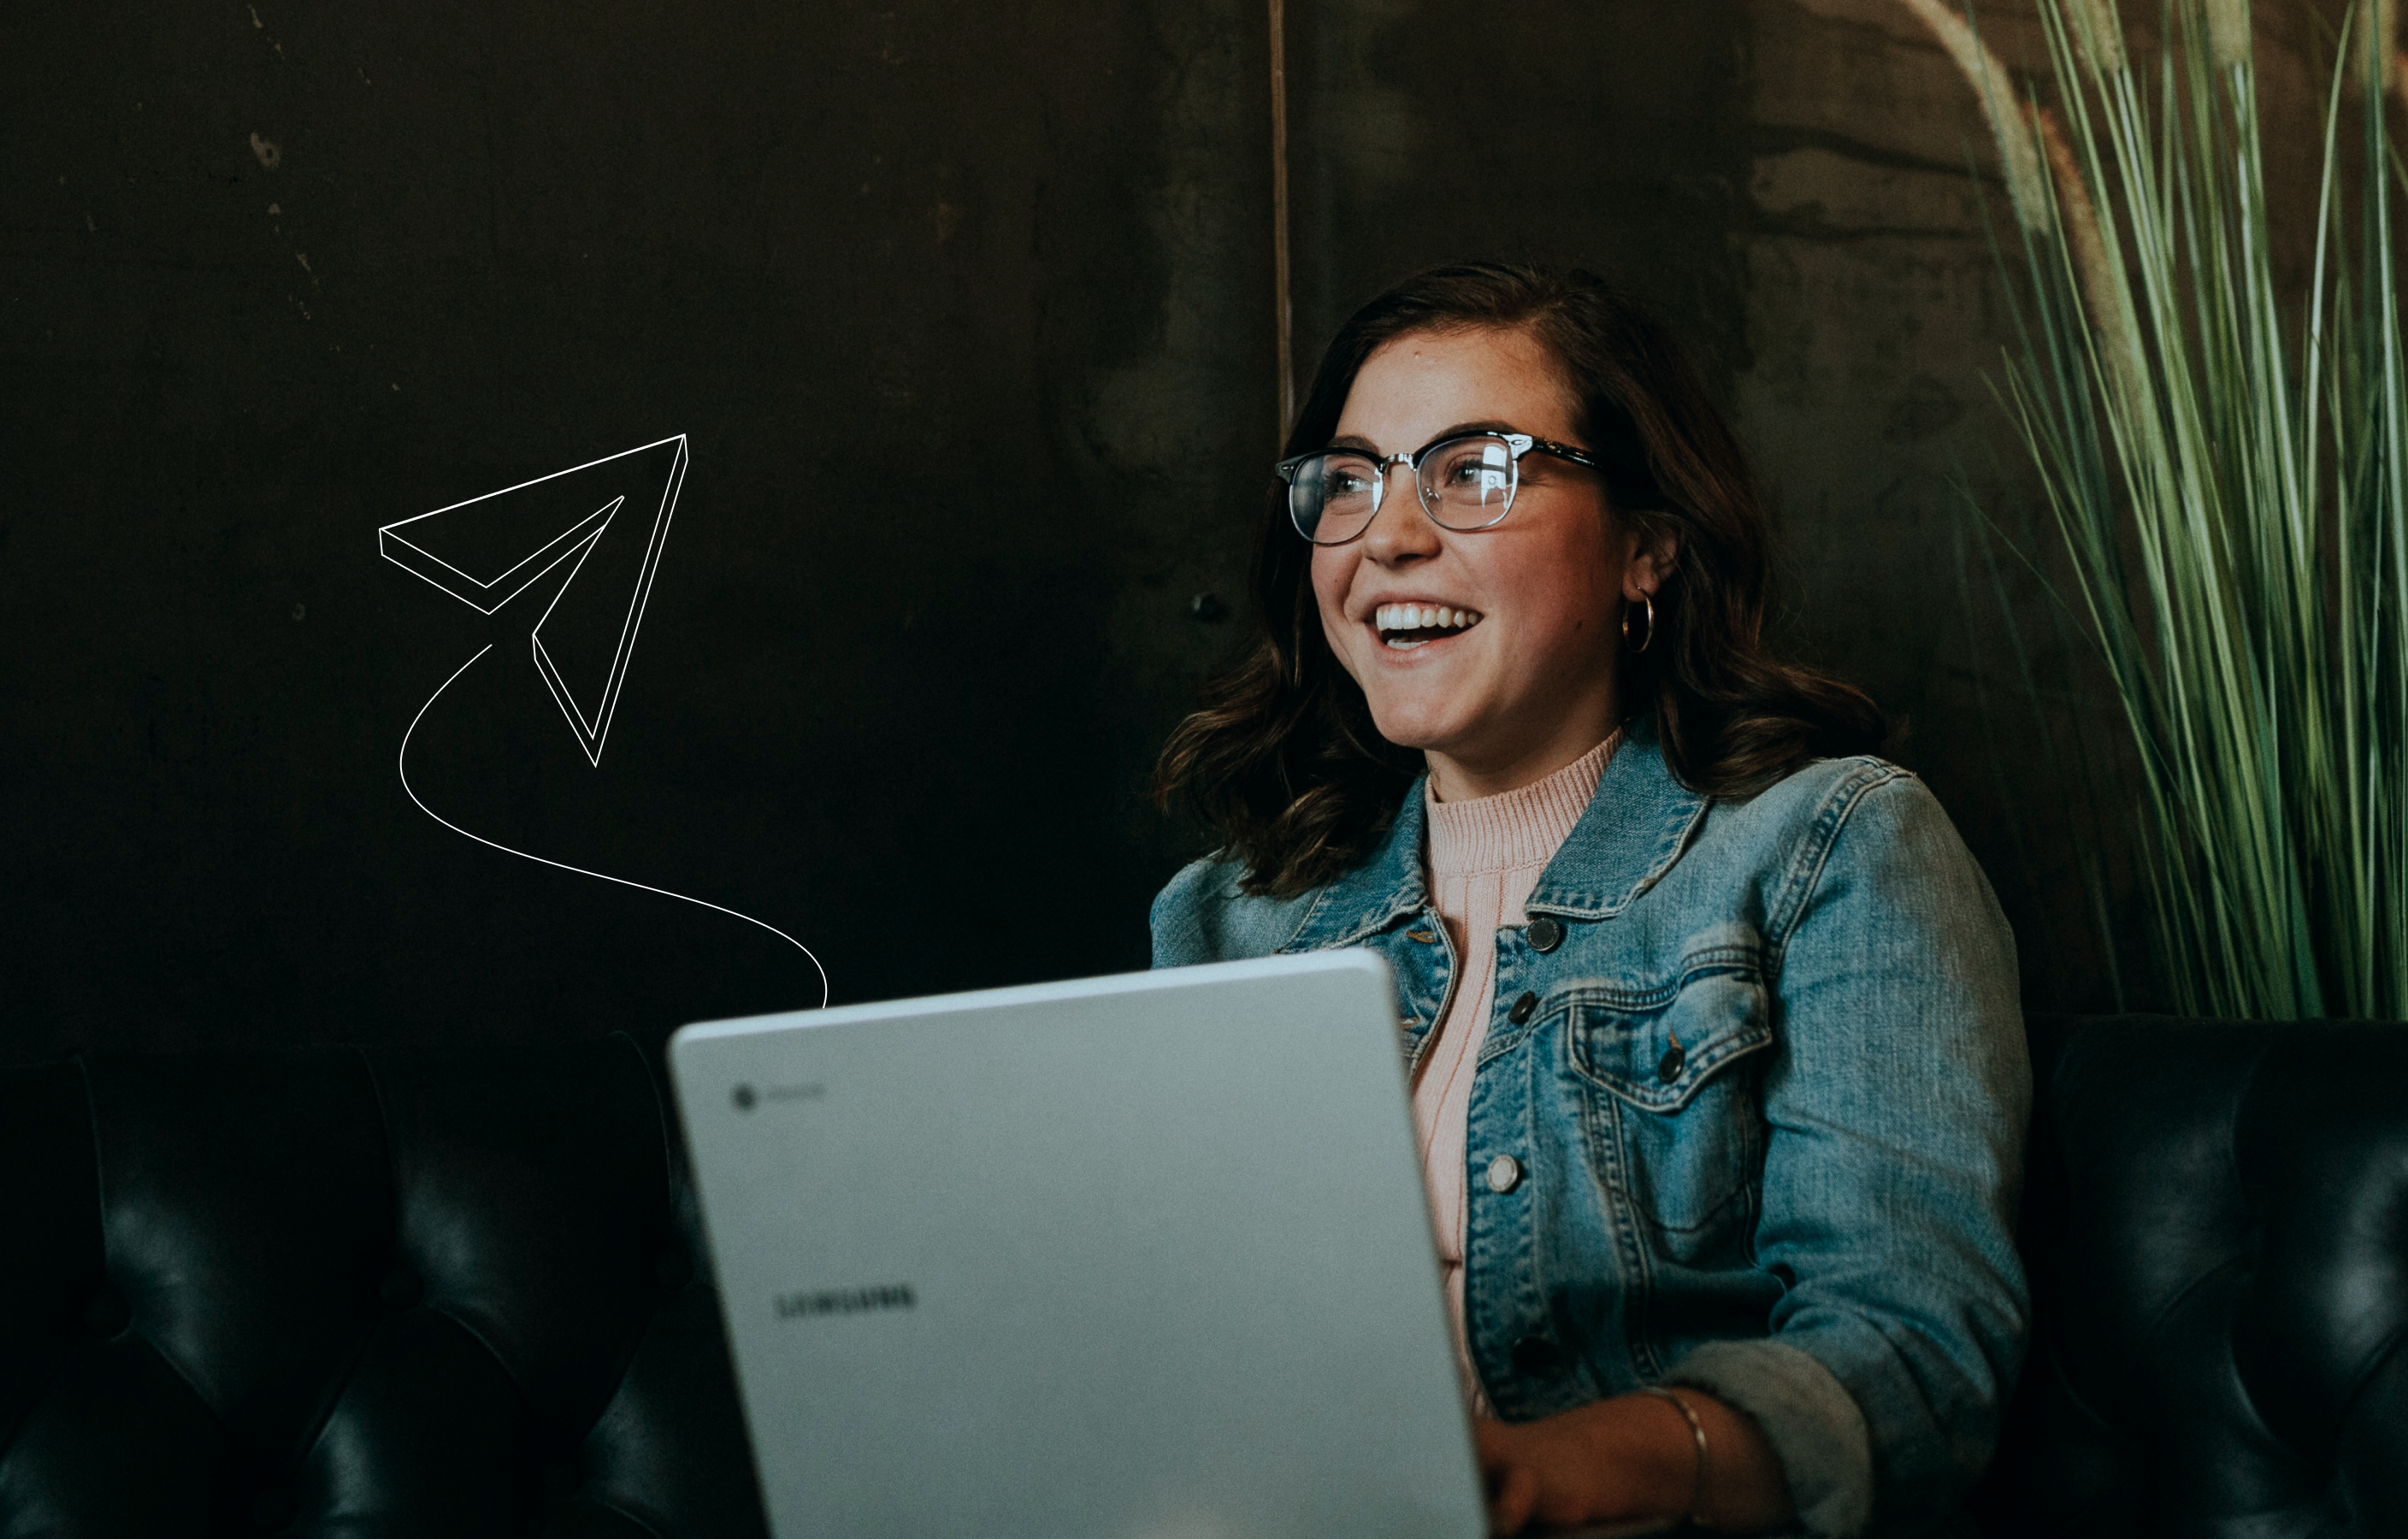 A young woman smiling while using her laptop, with a small illustration of a paper plane coming from the laptop overlaid